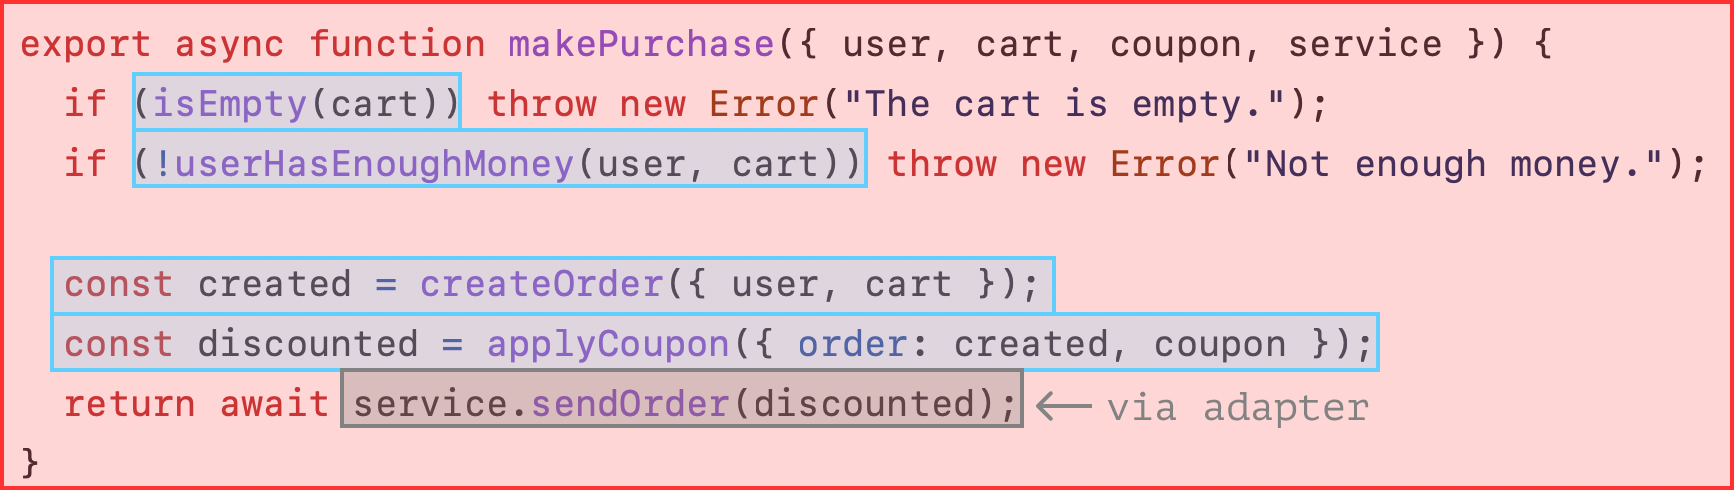 In the code, we implement this behavior using adapters